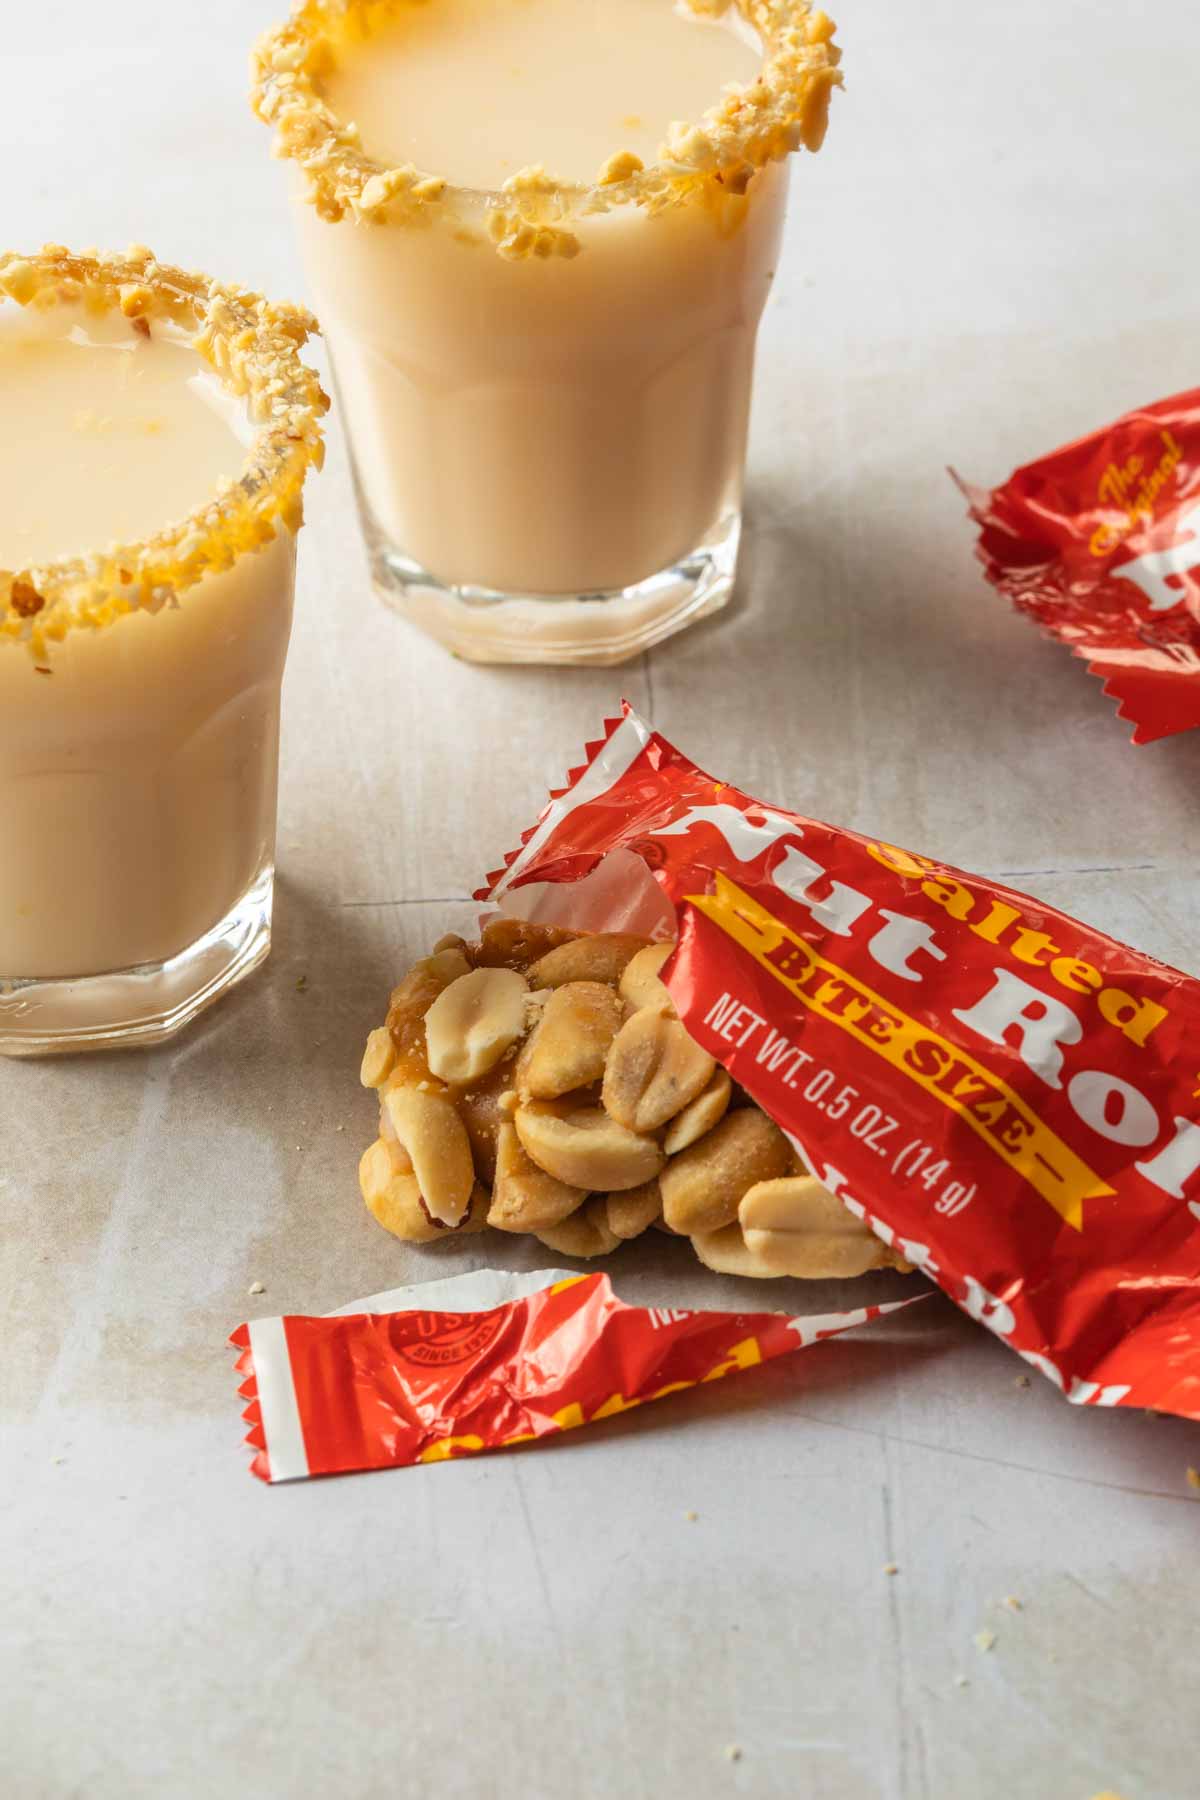 A salted nut roll candy bar open to show what is inside the package and a couple shot glasses rimmed with crushed peanuts. 